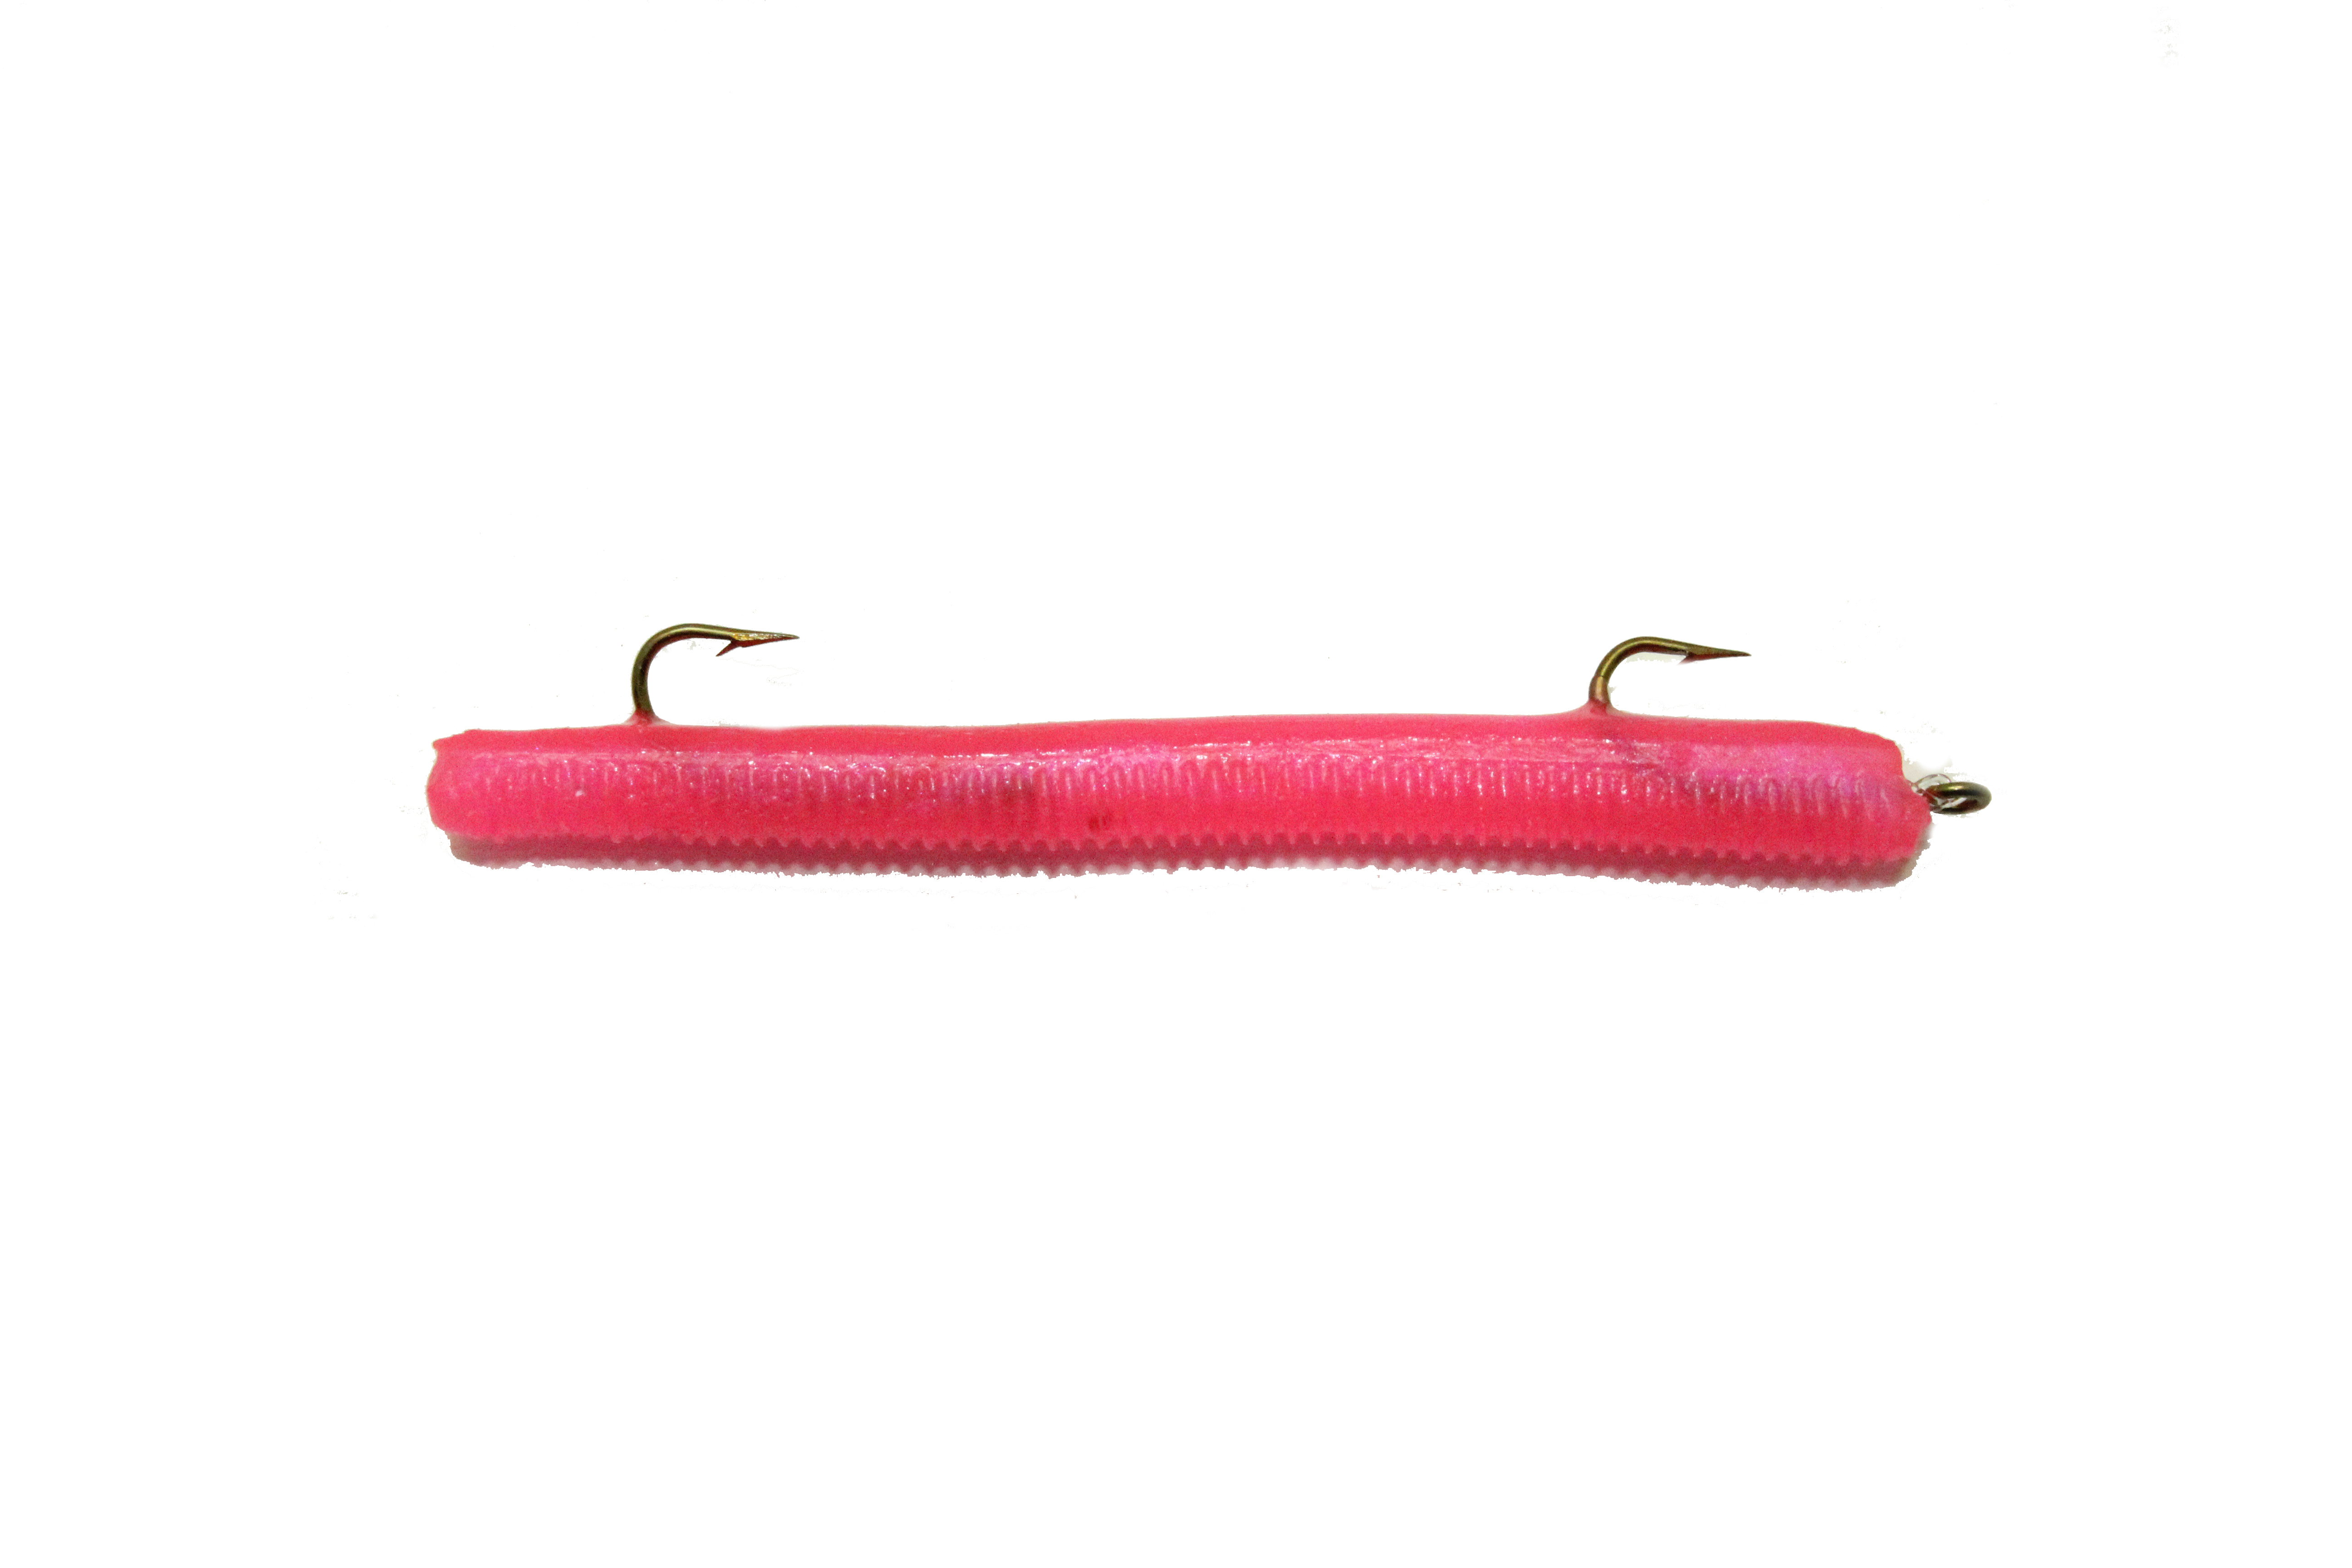 P-WEE TROUT WORM 2 1/2 - PINK PEARL - IKE-CON Fishing Tackle